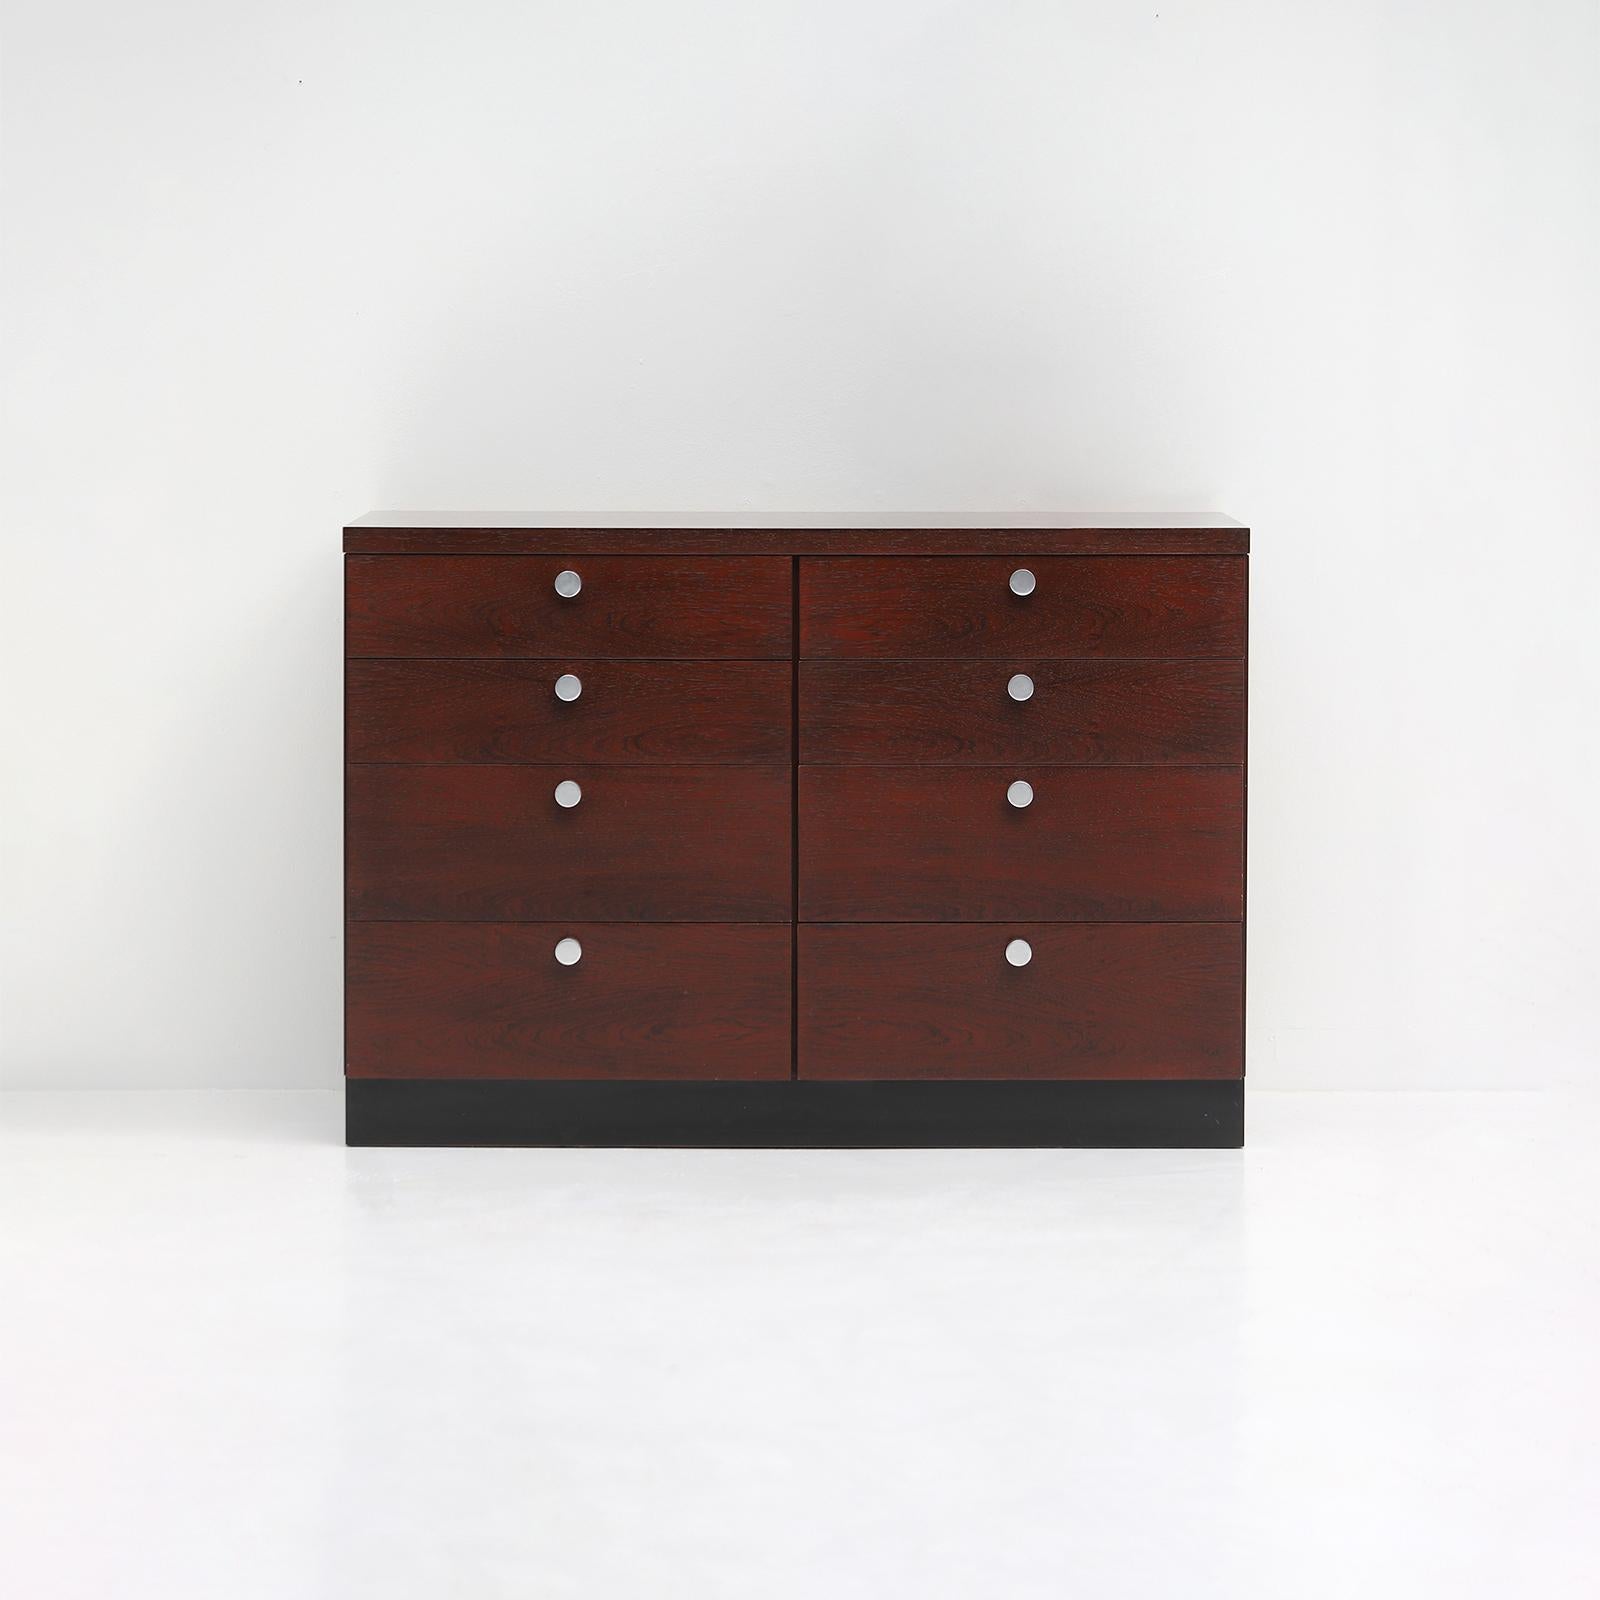 mind-century commode with drawers by Alfred Hendrickx 1970s For Sale 7